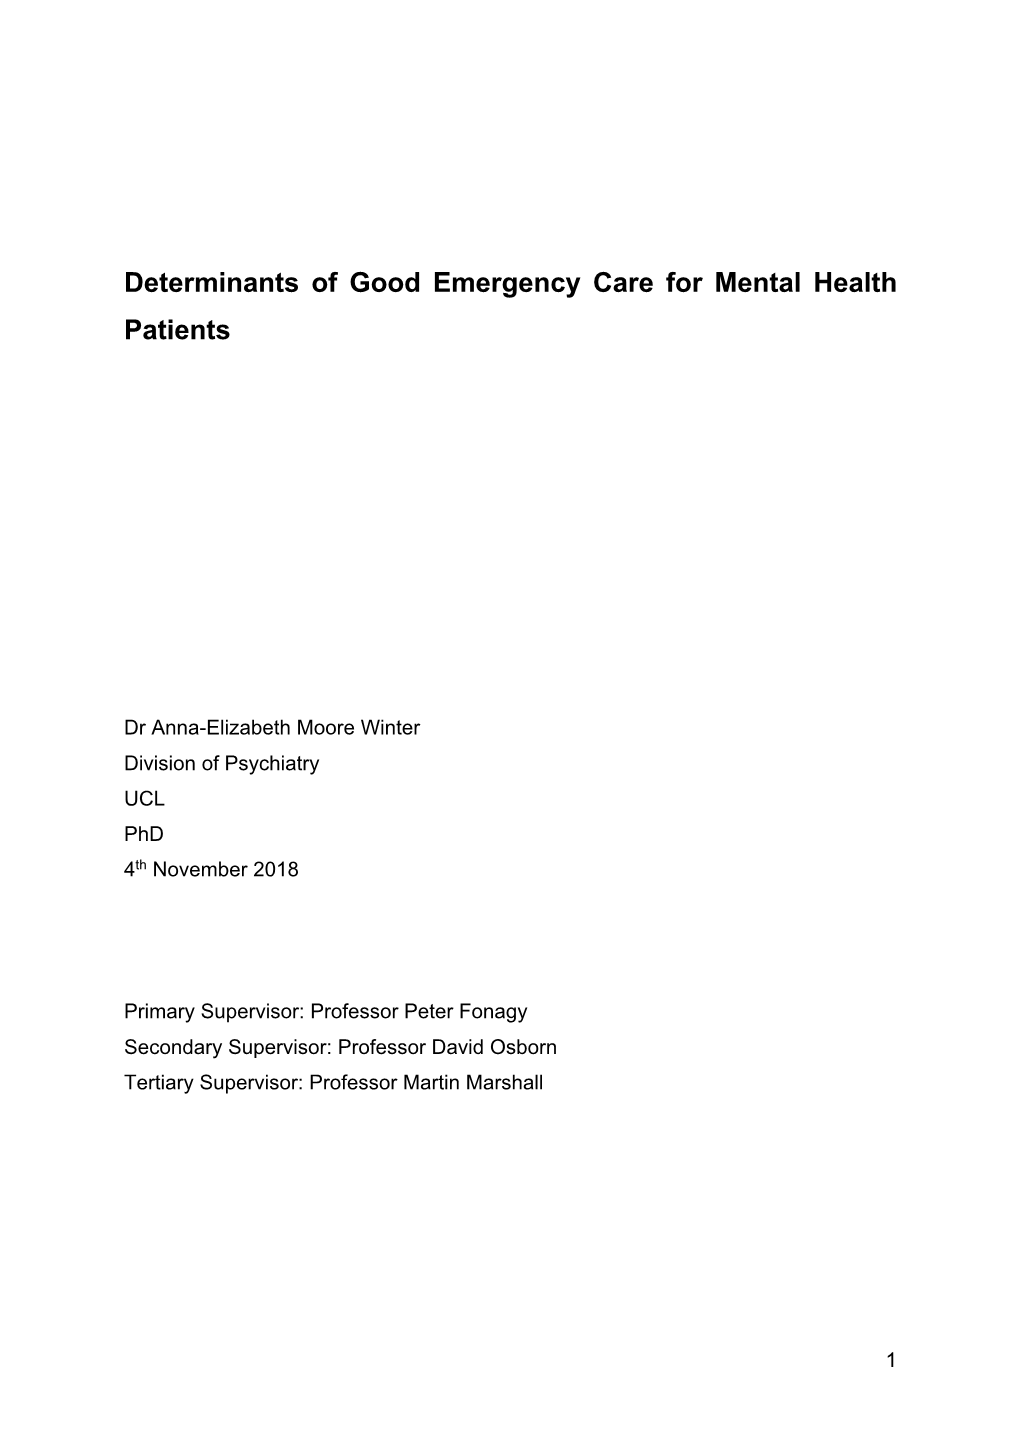 Determinants of Good Emergency Care for Mental Health Patients